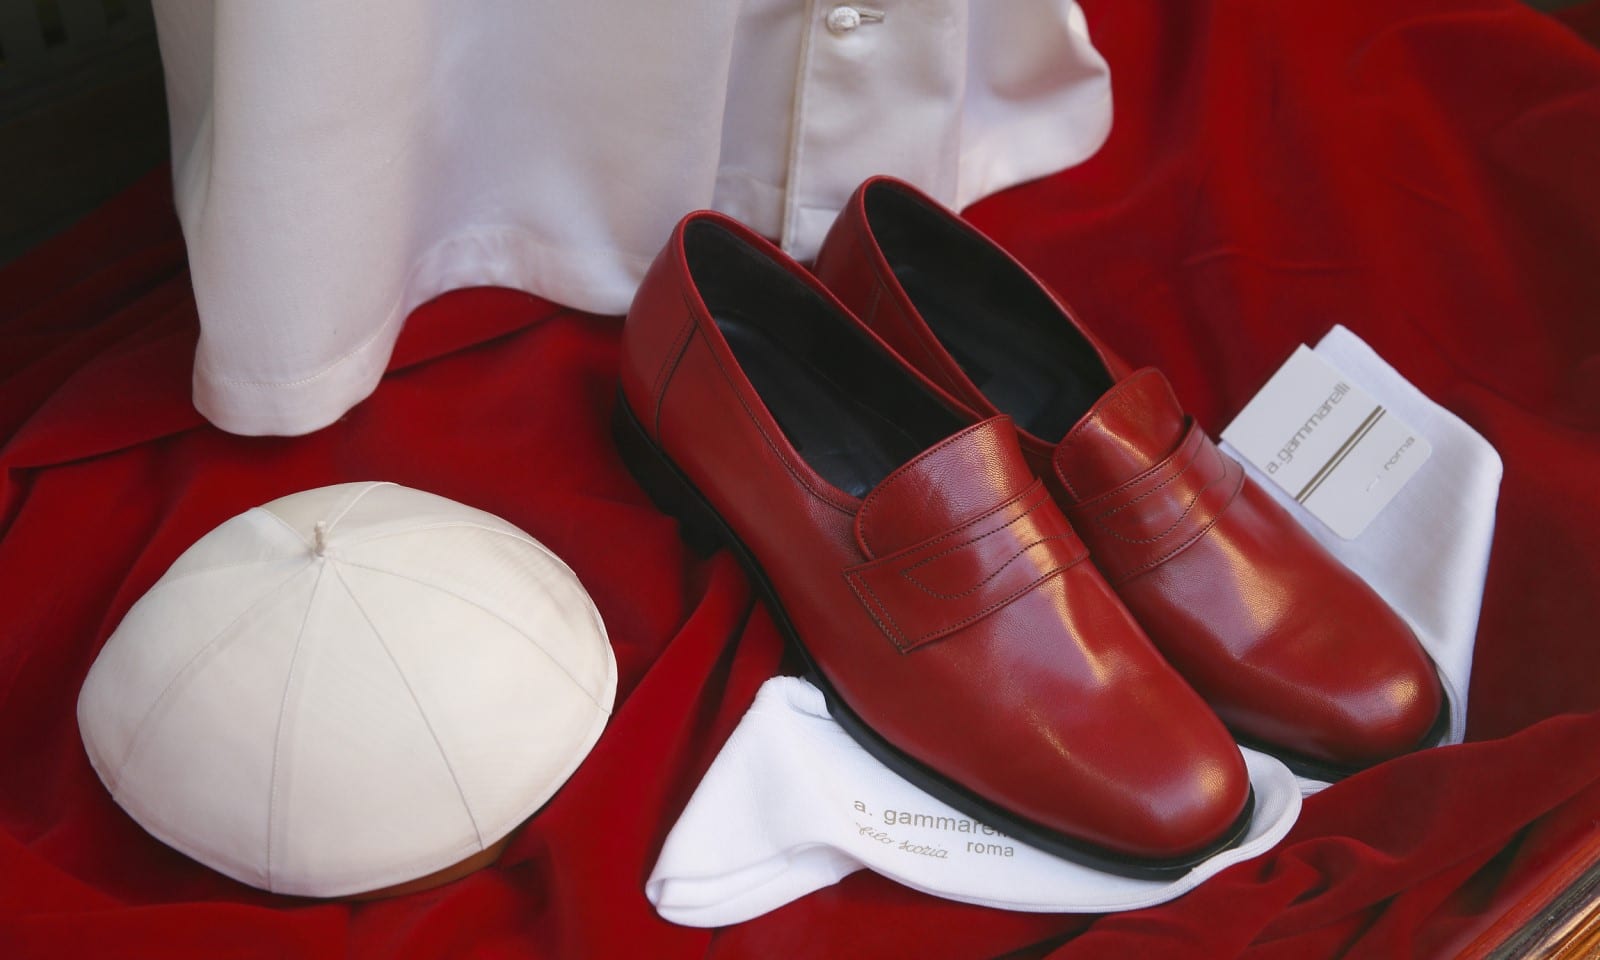 The History and Symbolism of the Pope's Red Shoes ~ Liturgical